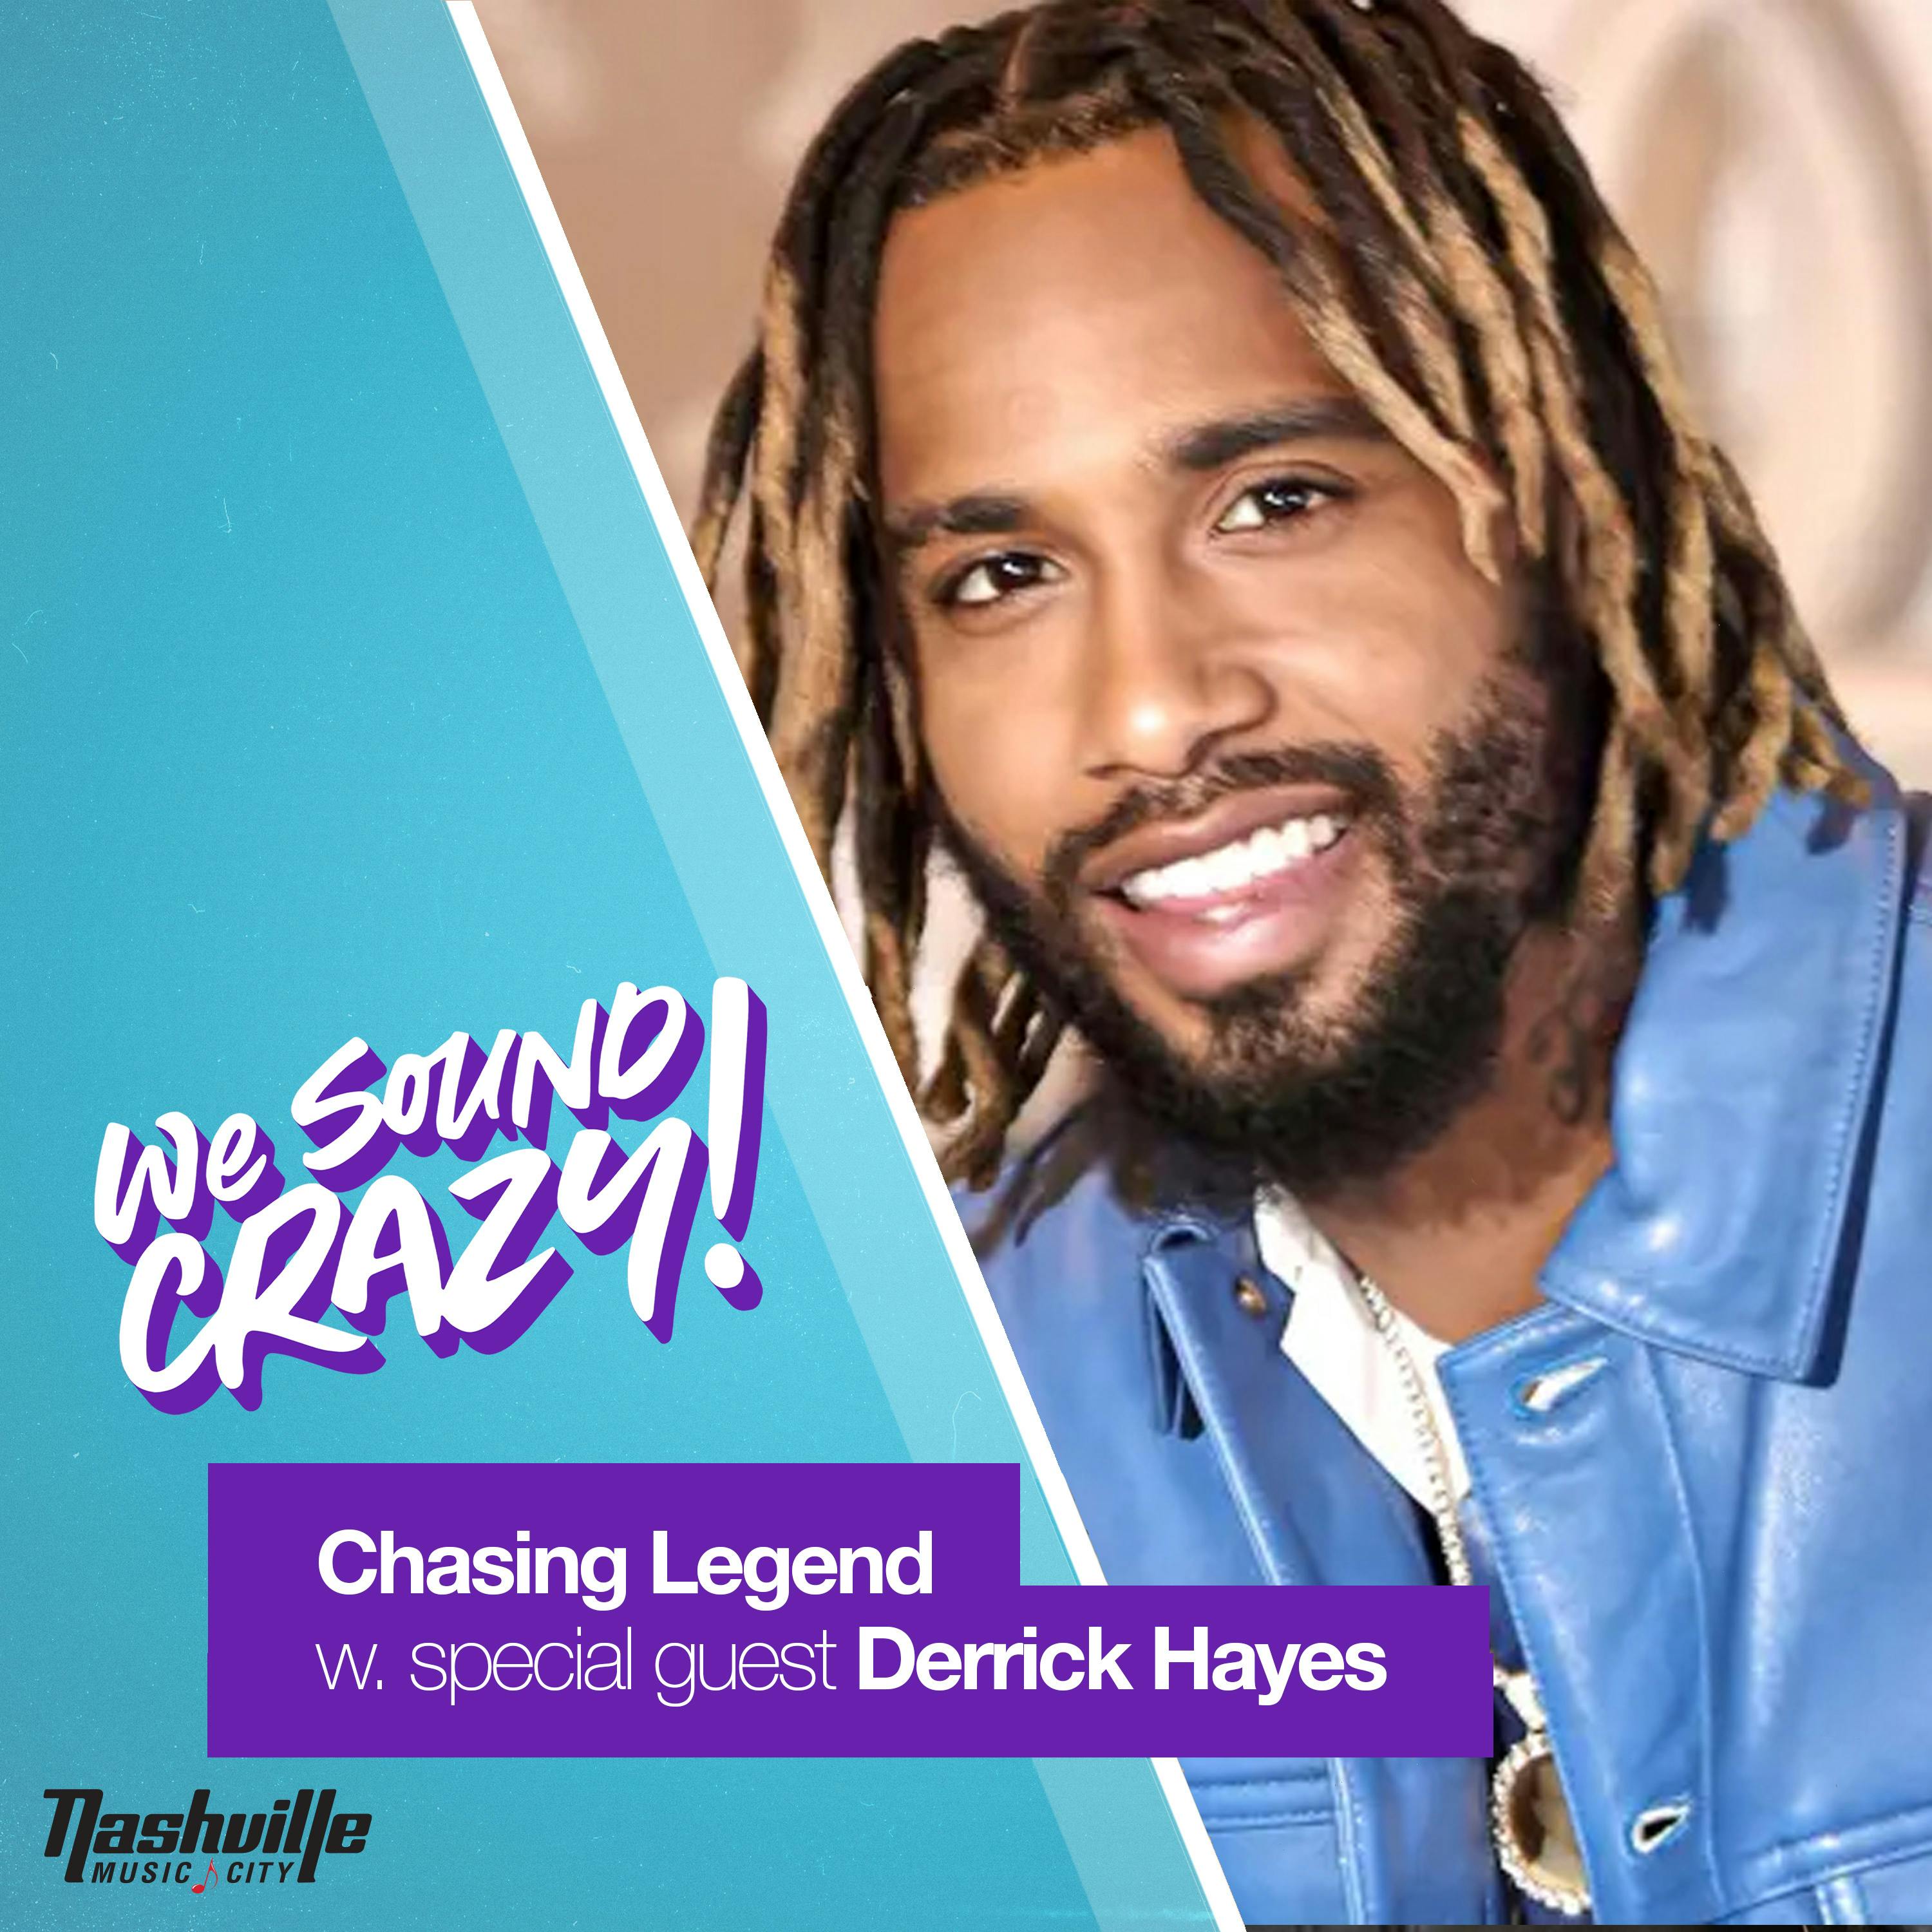 Chasing Legend w. special guest Derrick Hayes